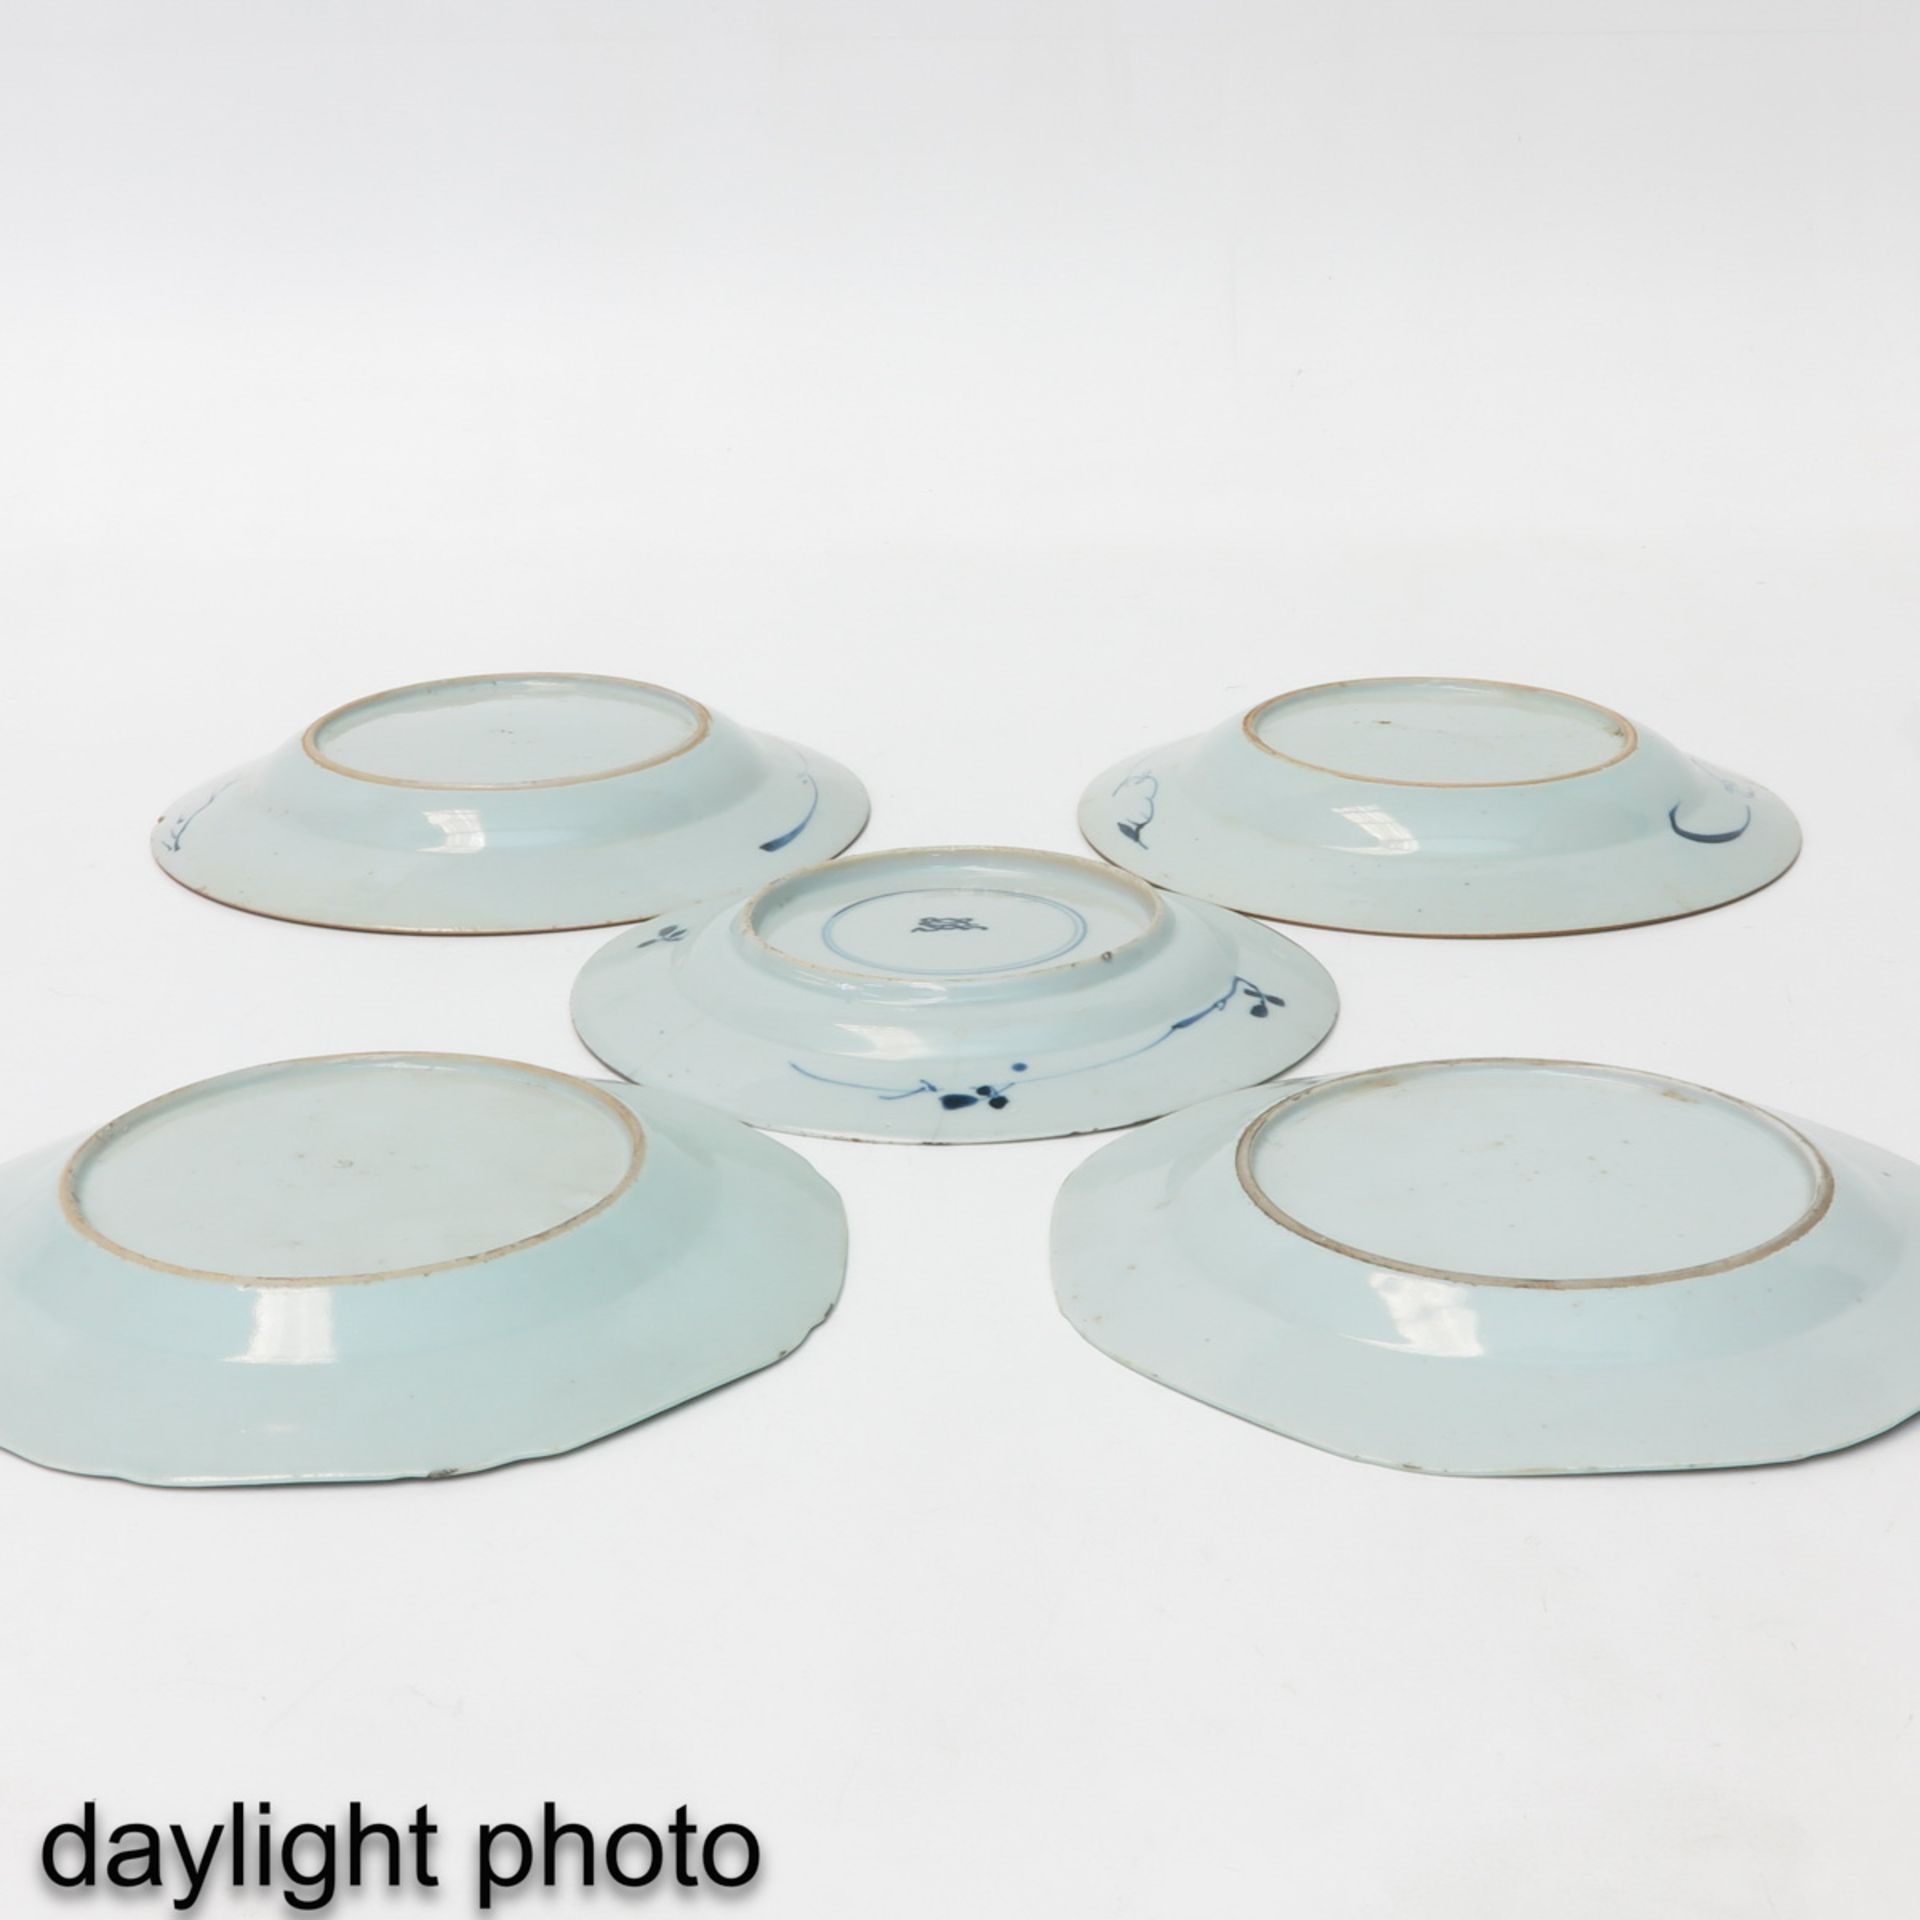 A Collection of 5 Blue and White Plates - Image 10 of 10